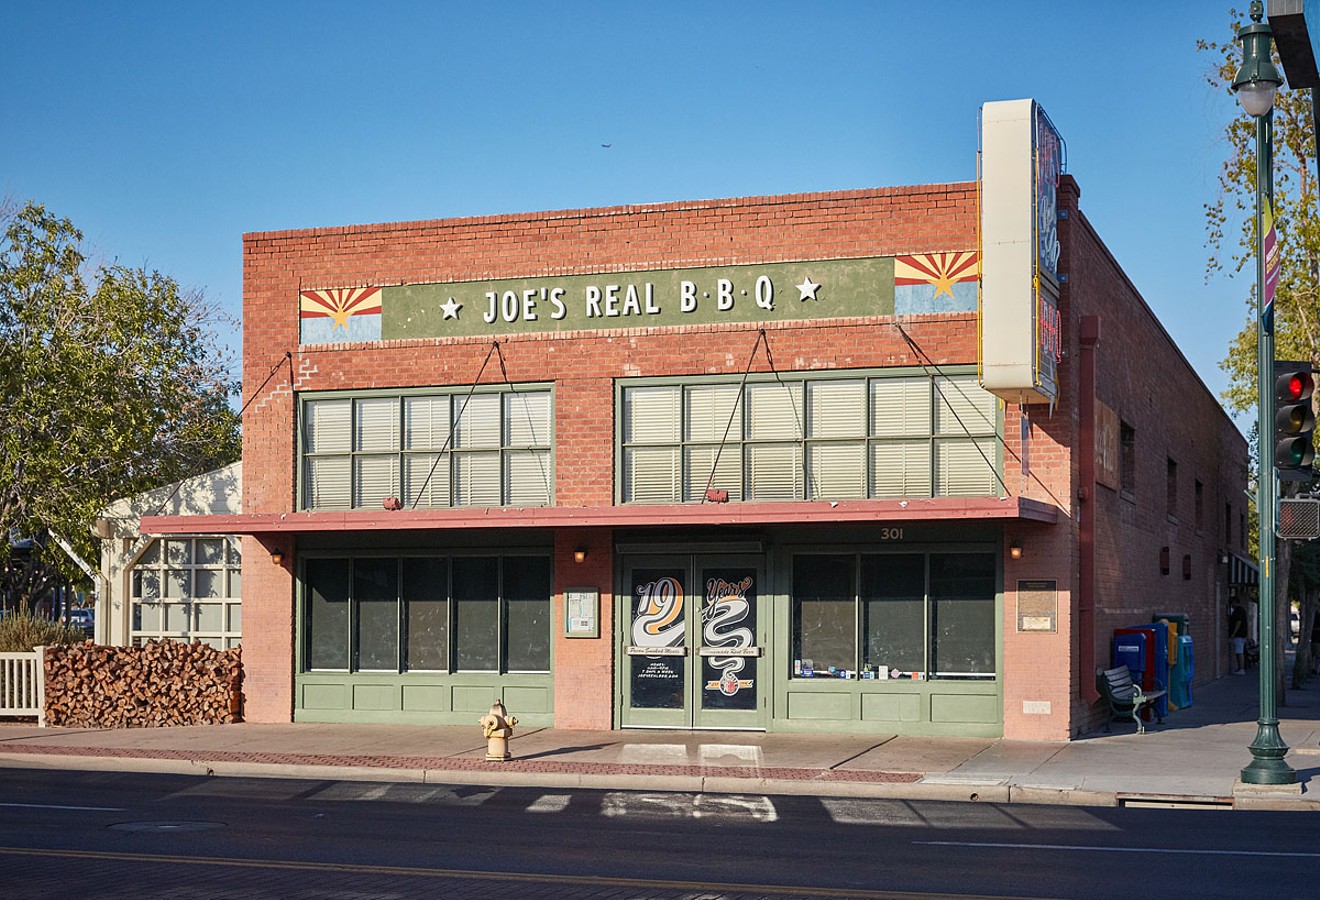 Joe's Real BBQ is in a building that was a Safeway grocery store when it opened in 1929.